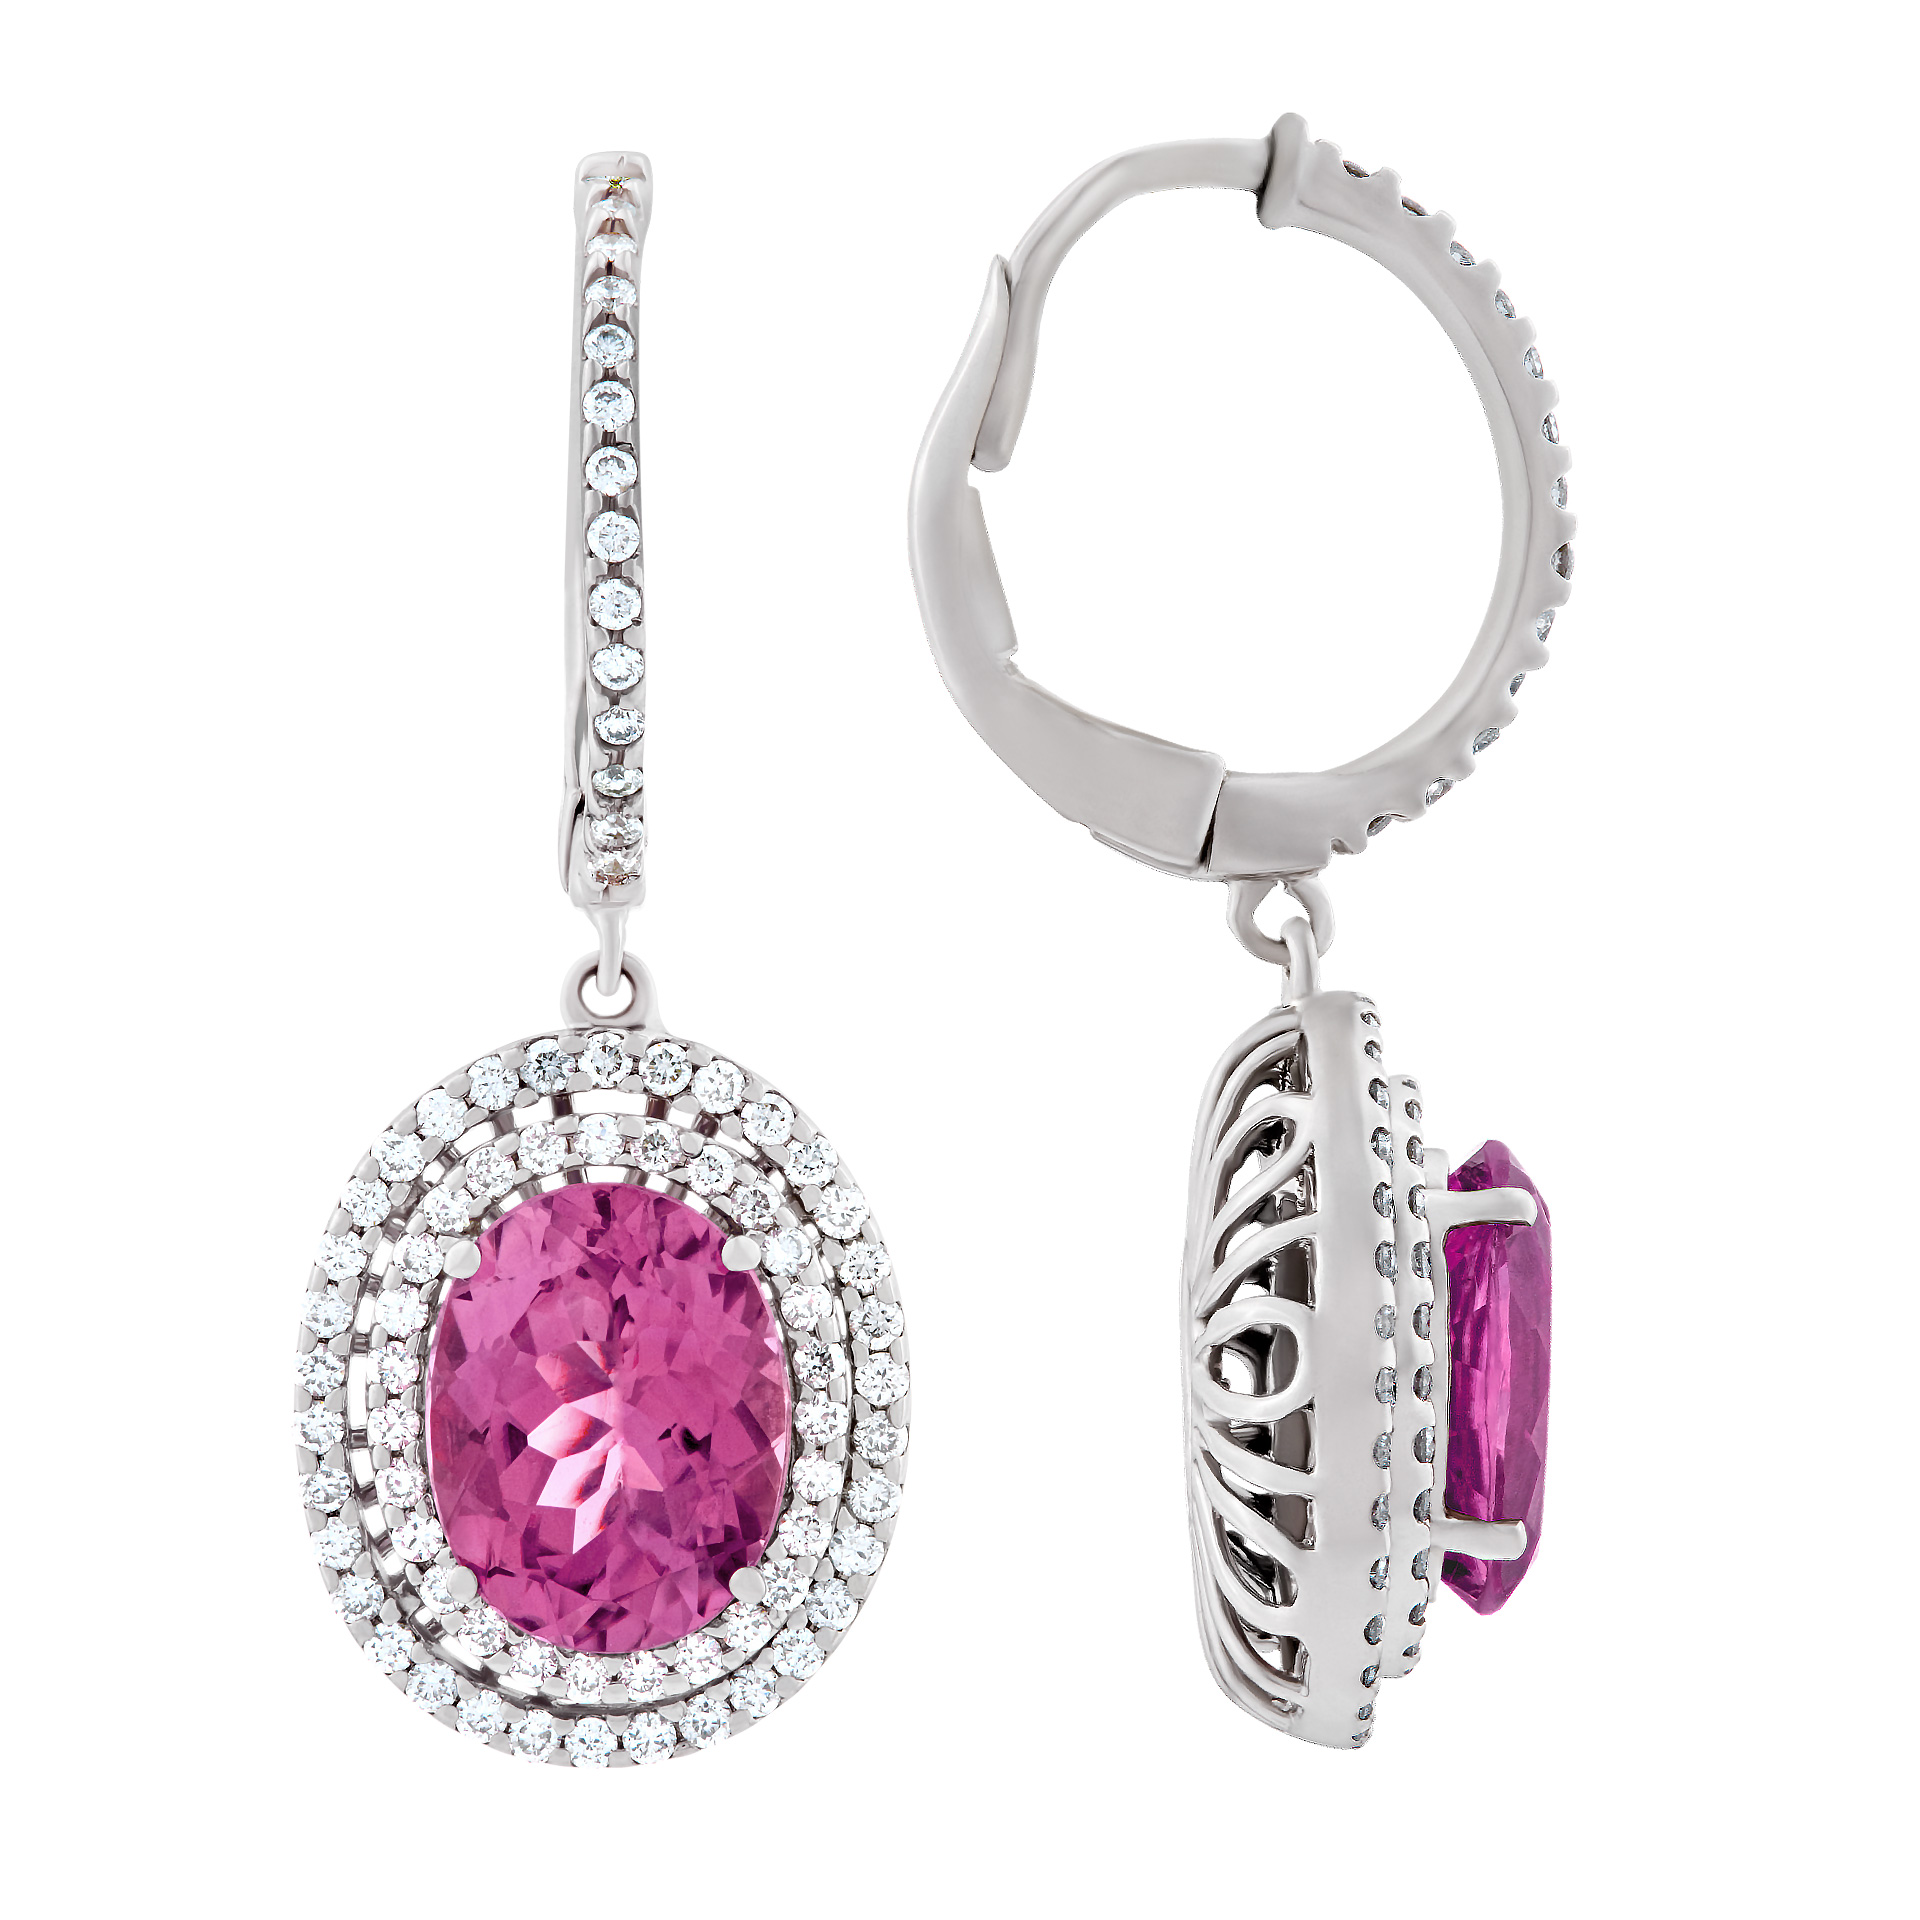 Pink tourmaline and diamond earrings set in 18k white gold. 0.74cts in diamonds